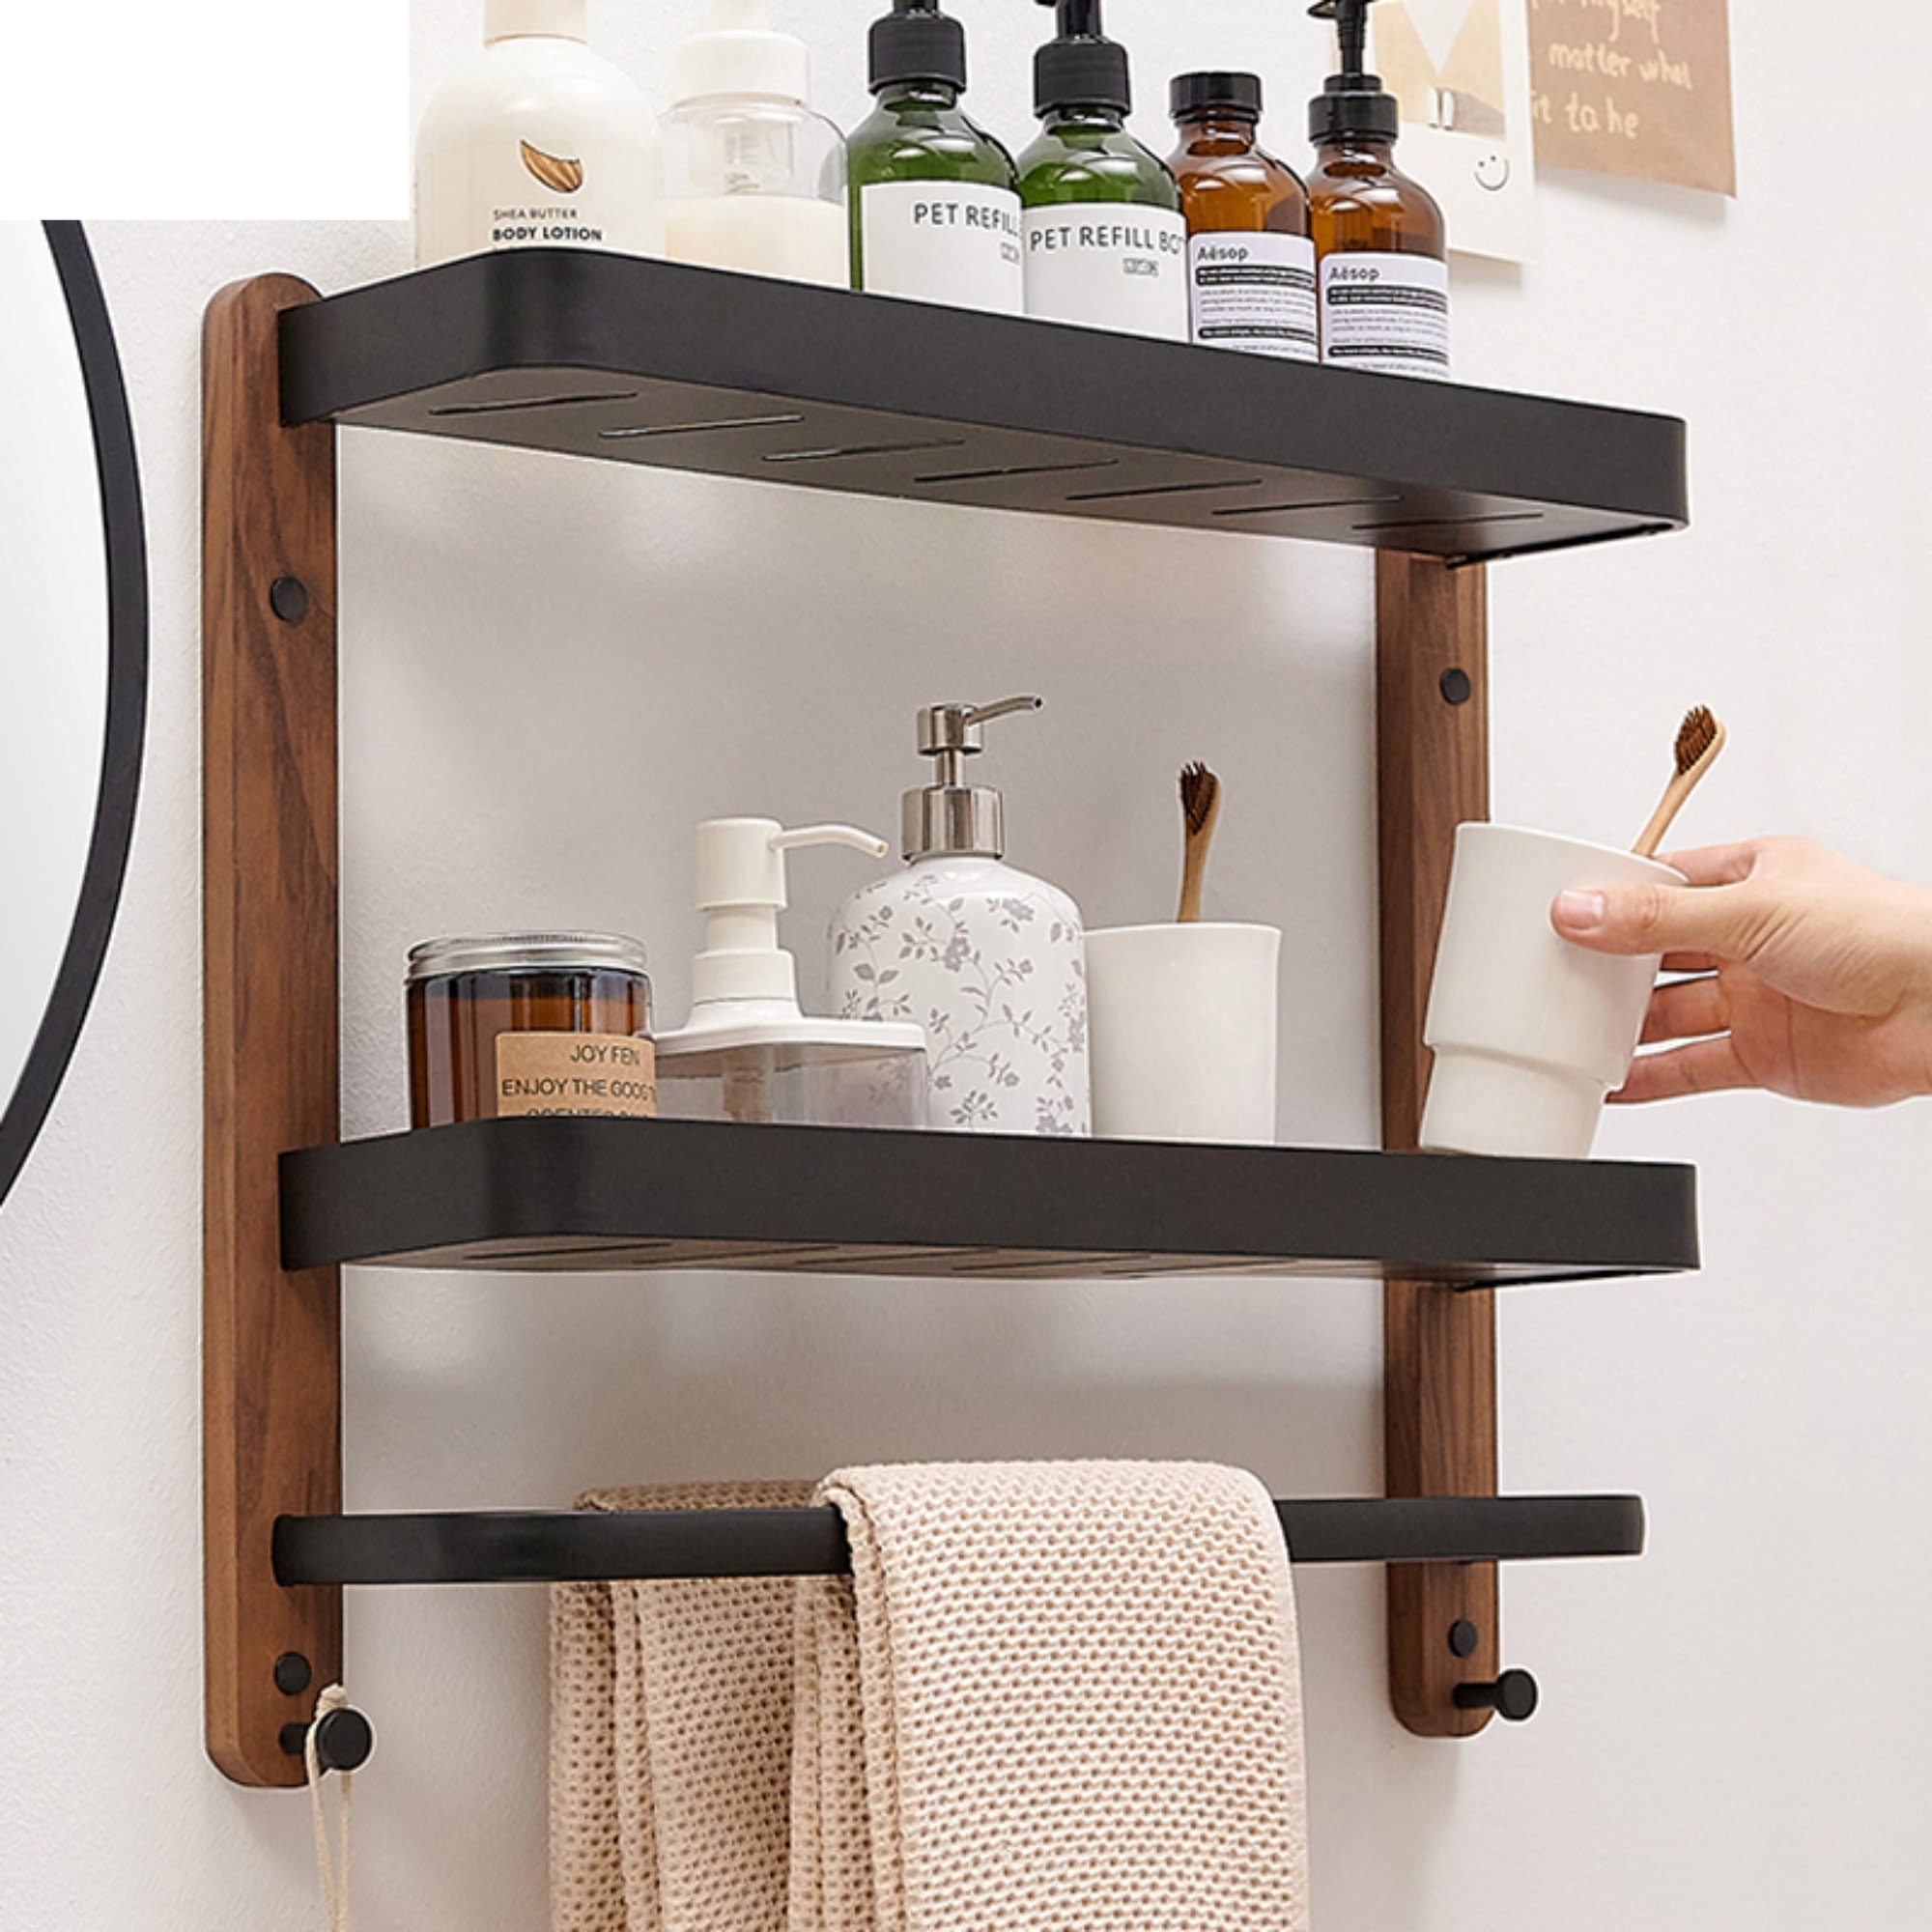 RICHER HOUSE Floating Shelves with Guardrail, Rustic Wood Shelves for Wall  Décor, Farmhouse Bathroom Accessories Wall Mounted, Bathroom Wall Organizer